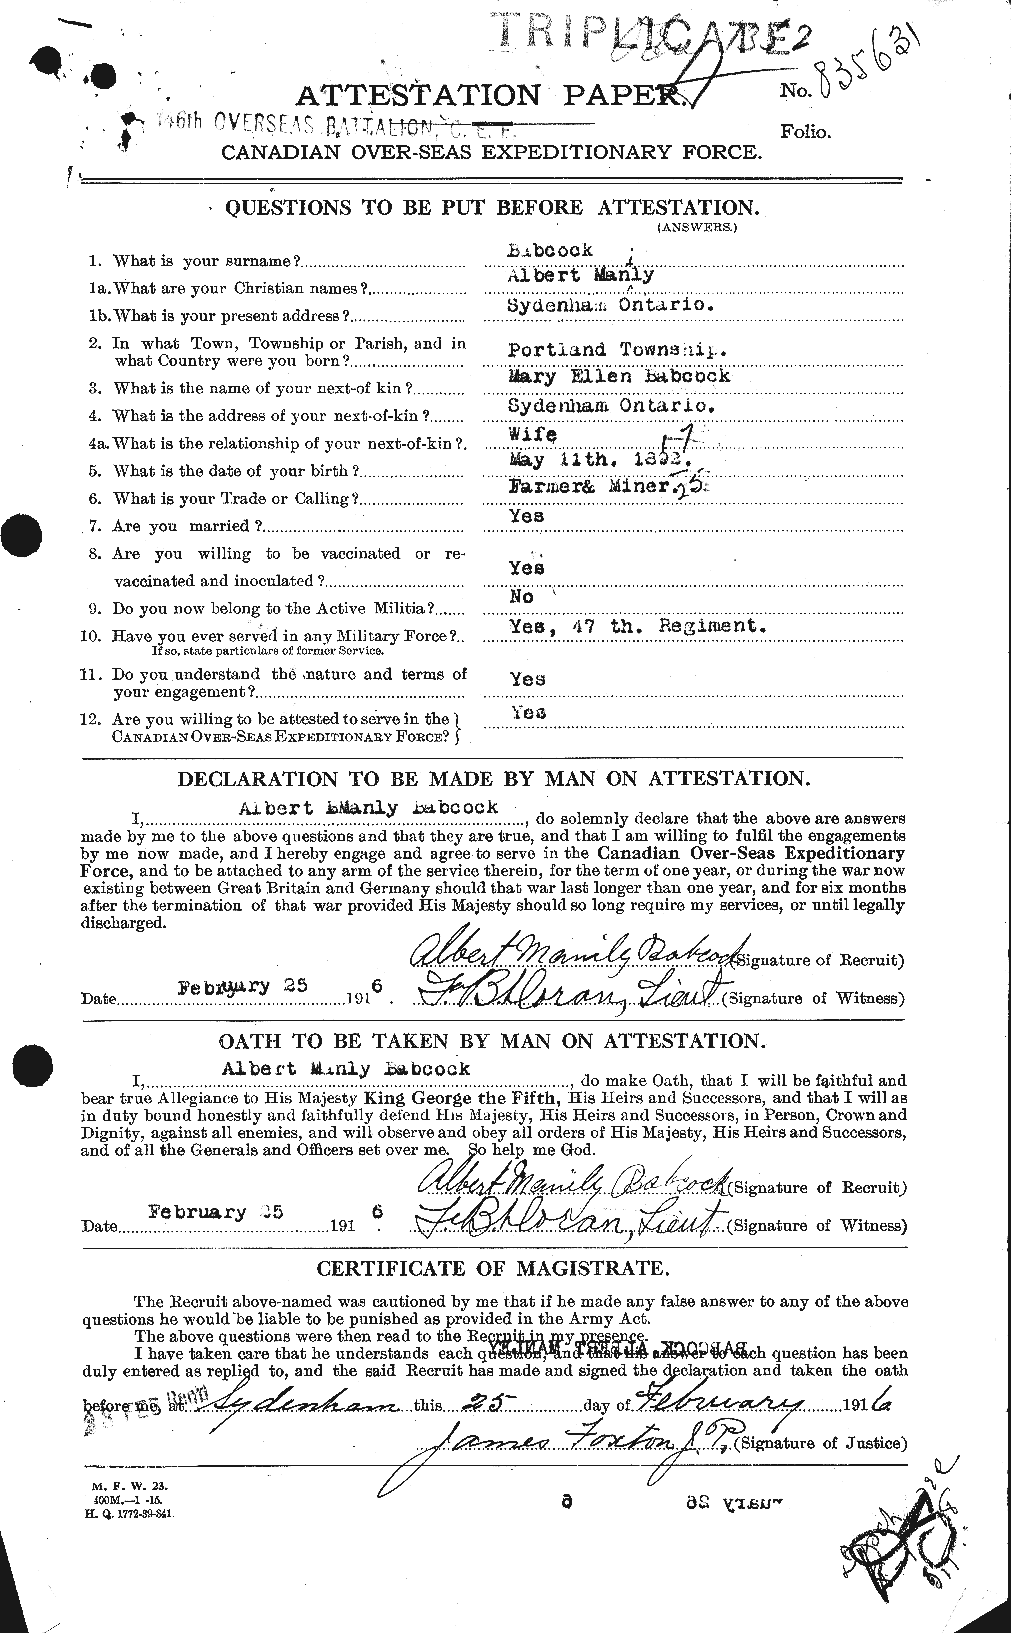 Personnel Records of the First World War - CEF 216013a